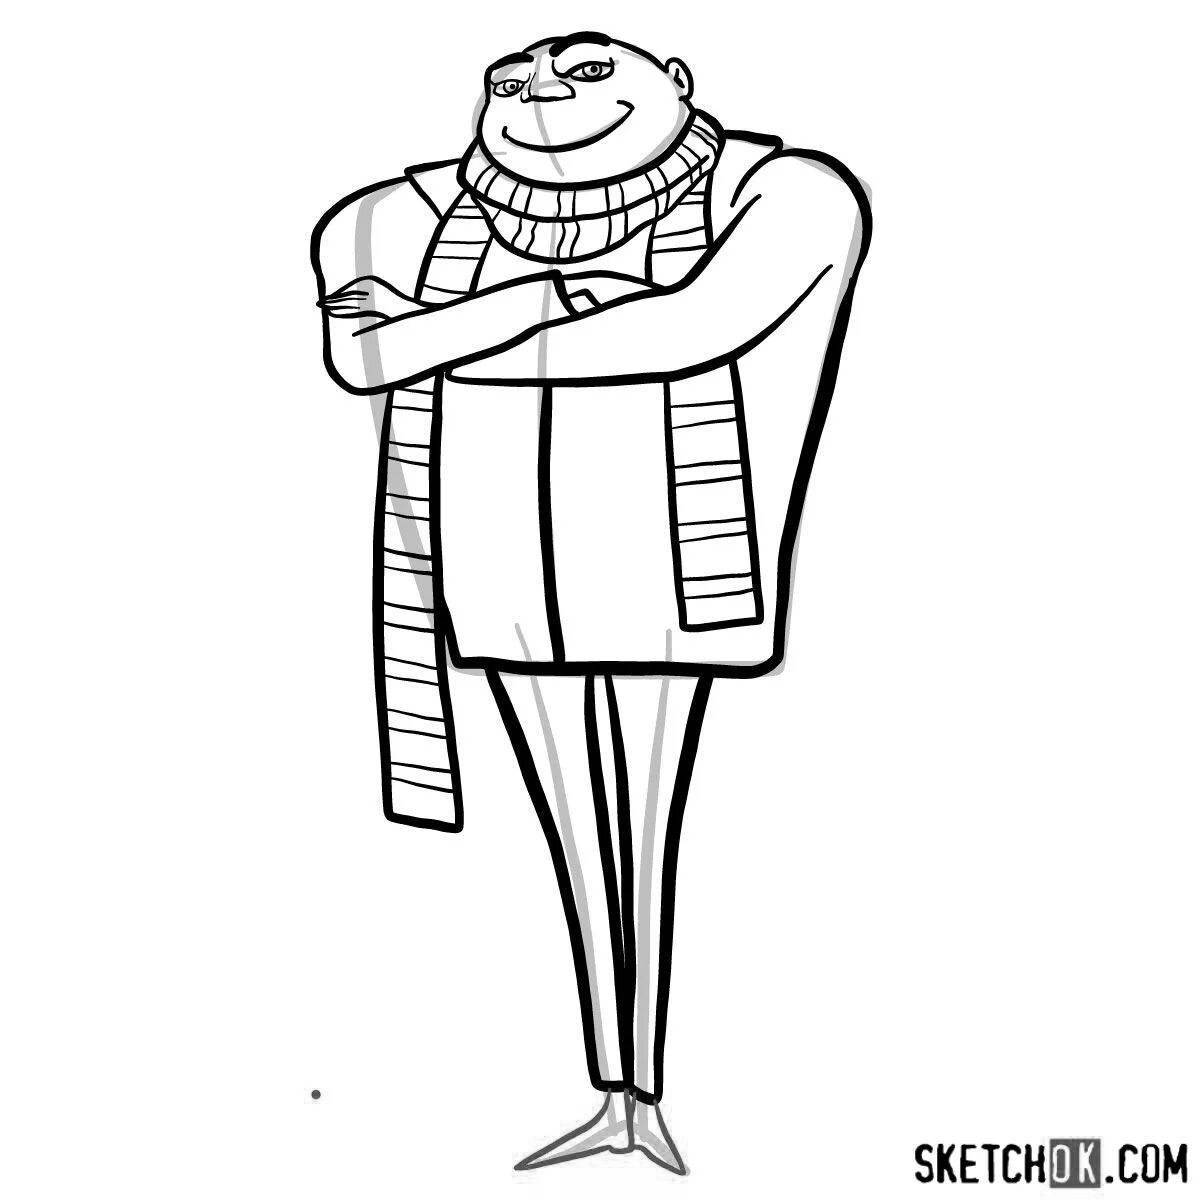 Gru's amazing coloring page